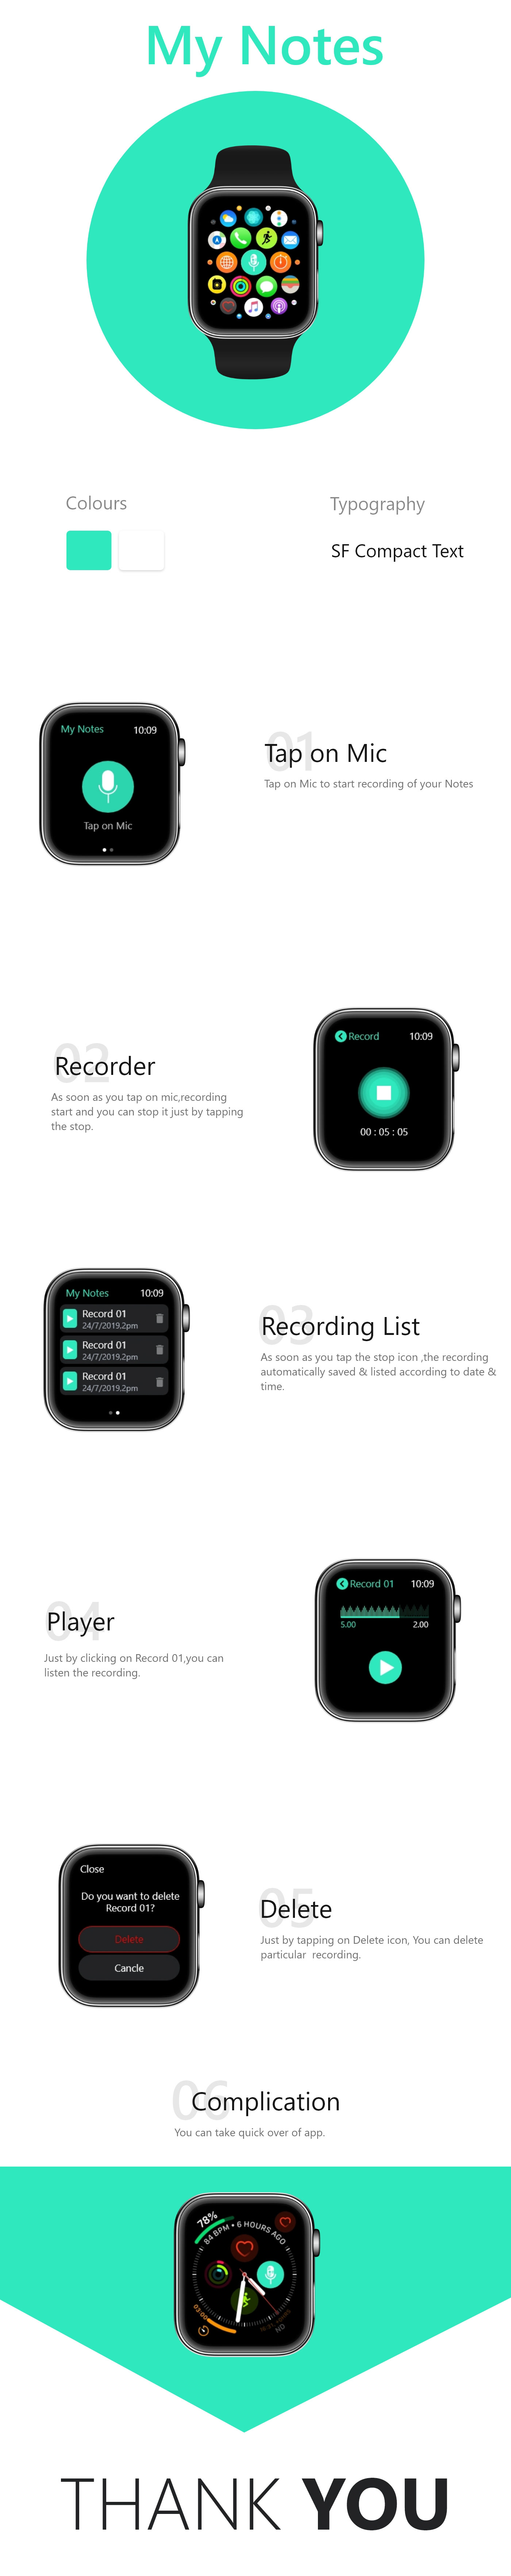 my notes apple watch presentation voice recorder notes recorder